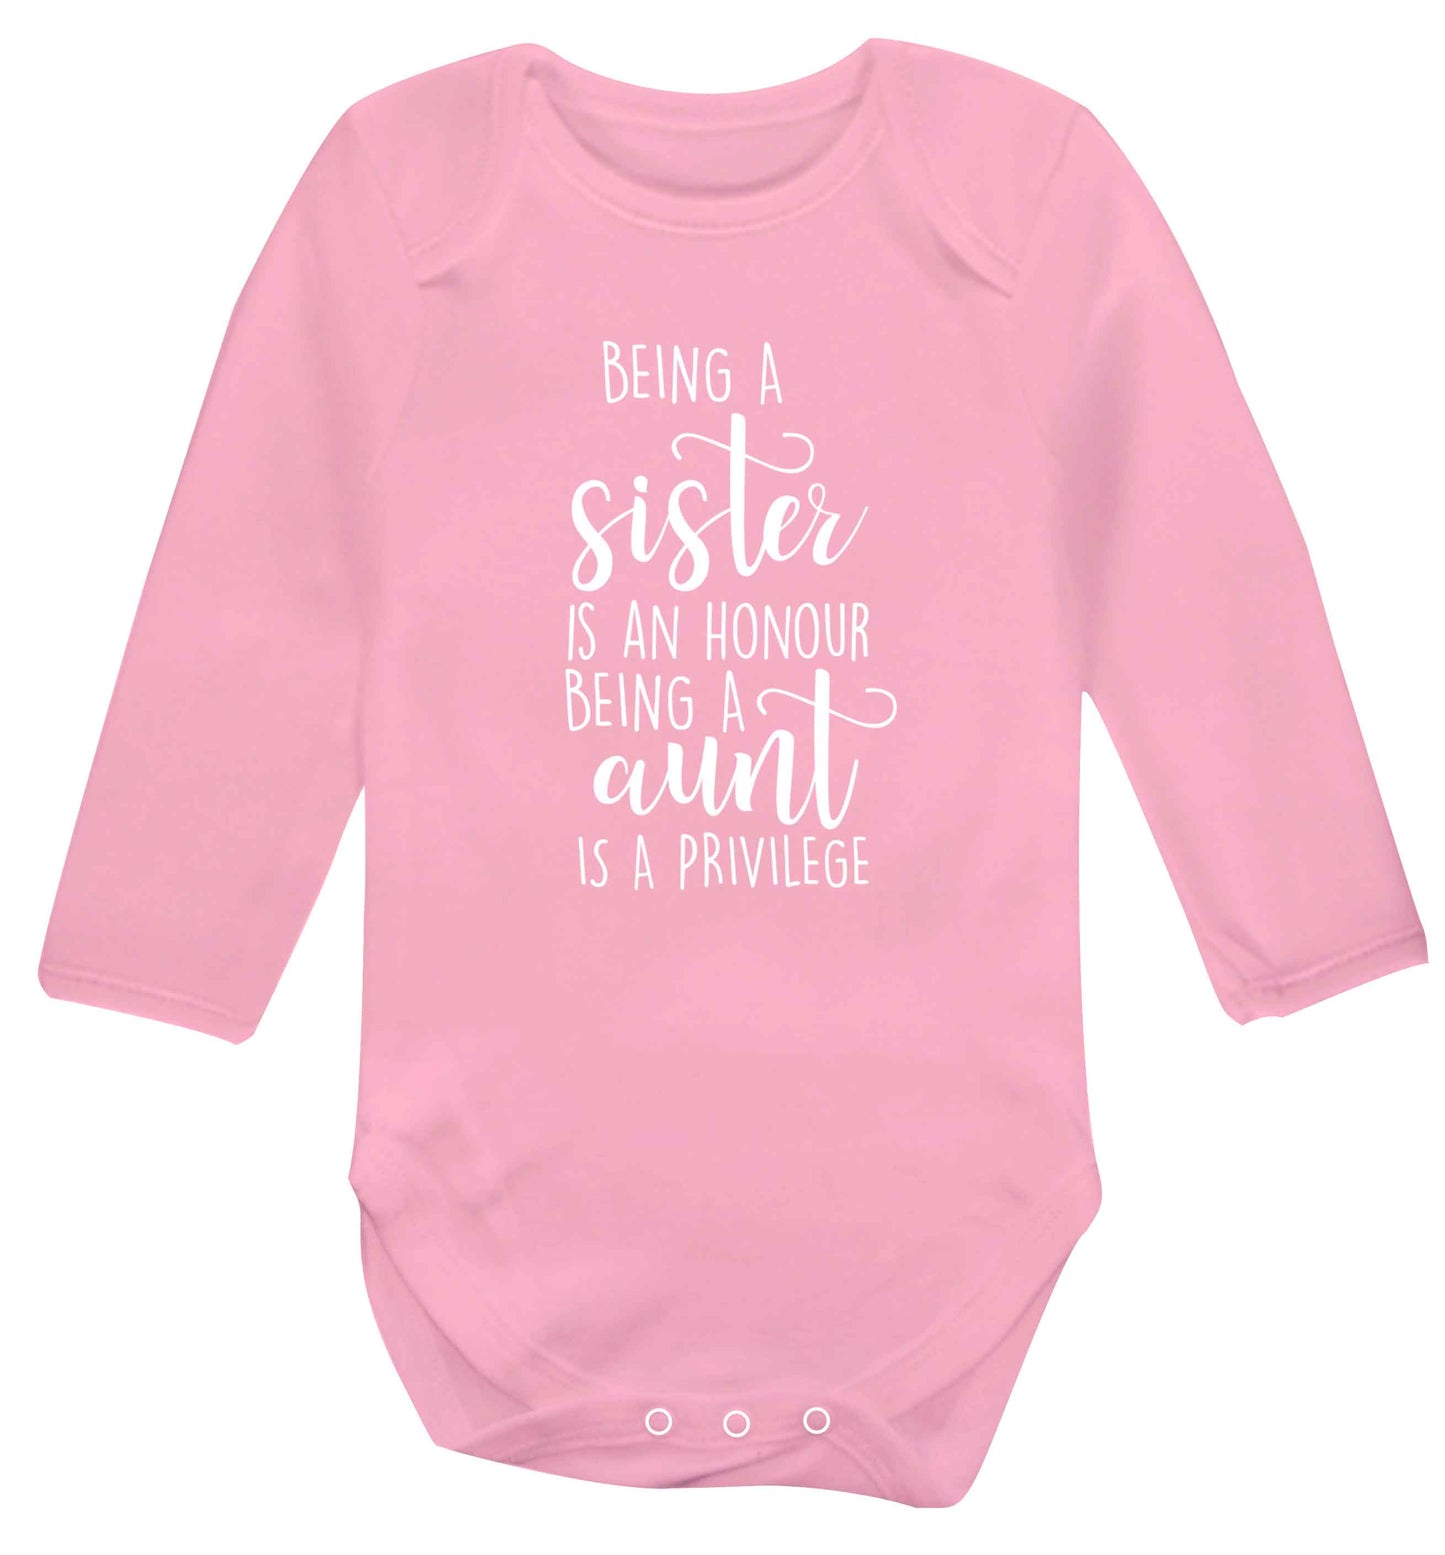 Being a sister is an honour being an auntie is a privilege Baby Vest long sleeved pale pink 6-12 months